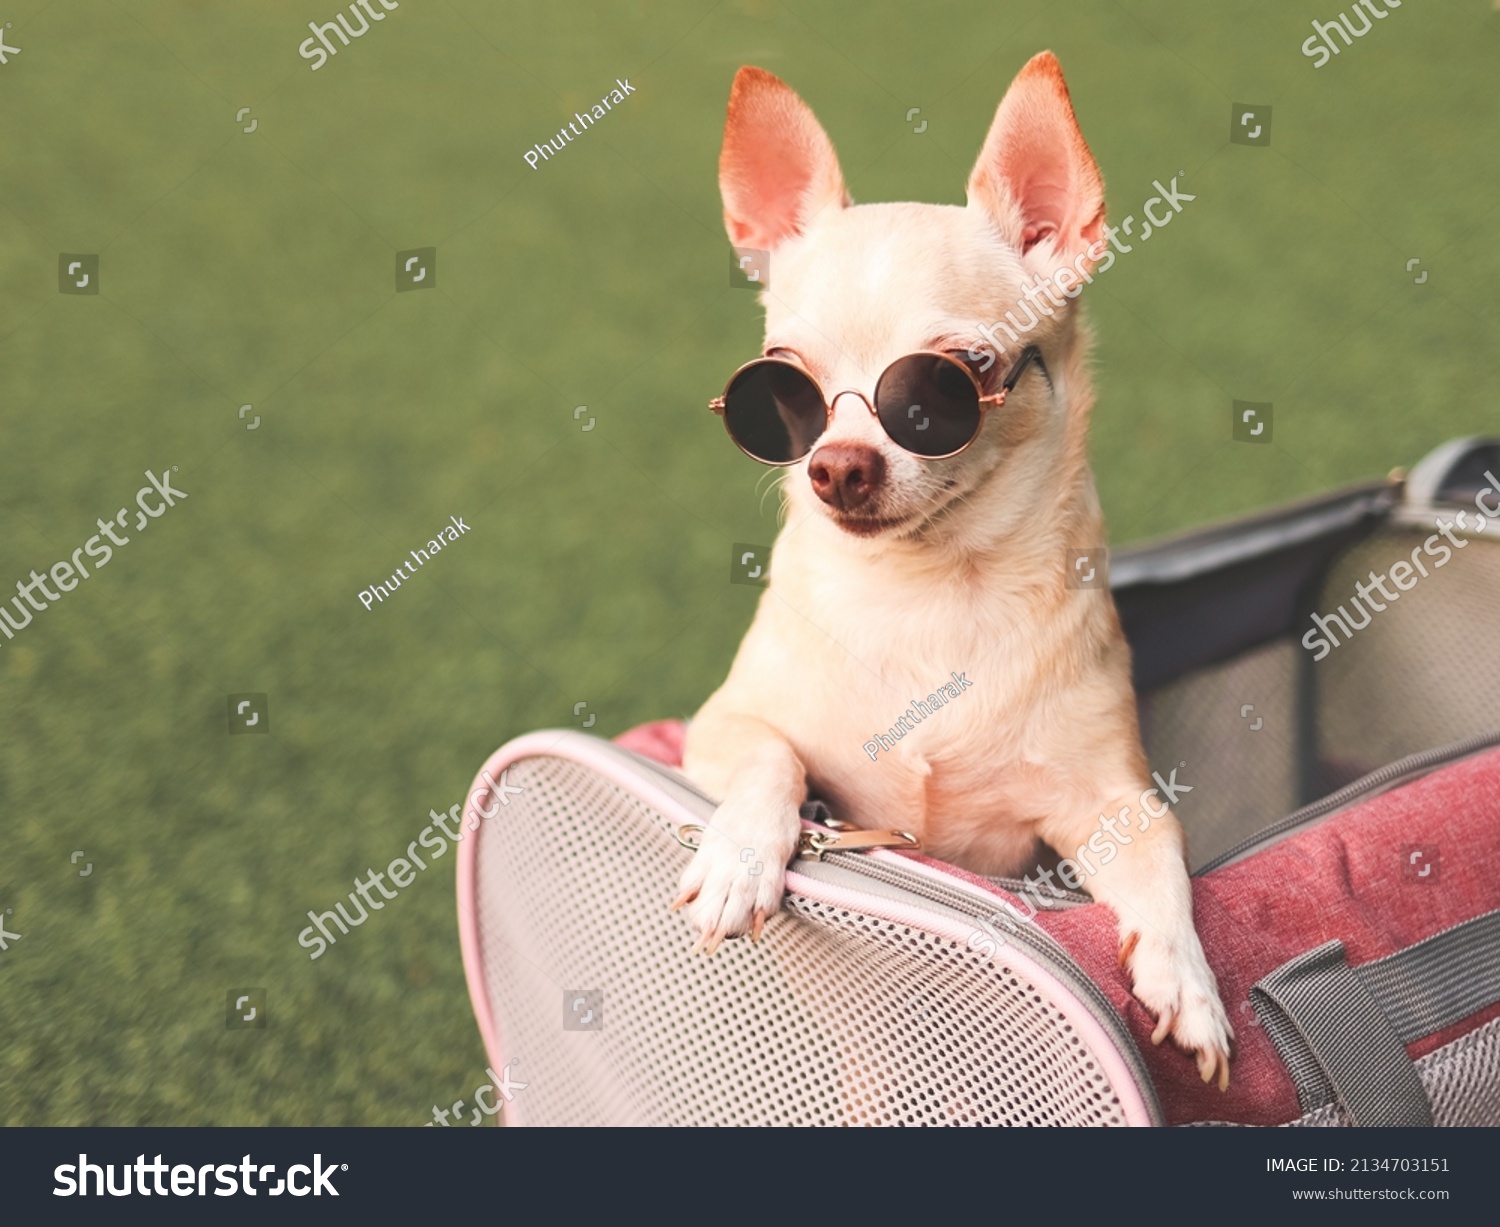 Portrait of brown chihuahua dog wearing sunglasses  in traveler pet carrier bag on green grass, ready to travel. Safe travel with animals. #2134703151